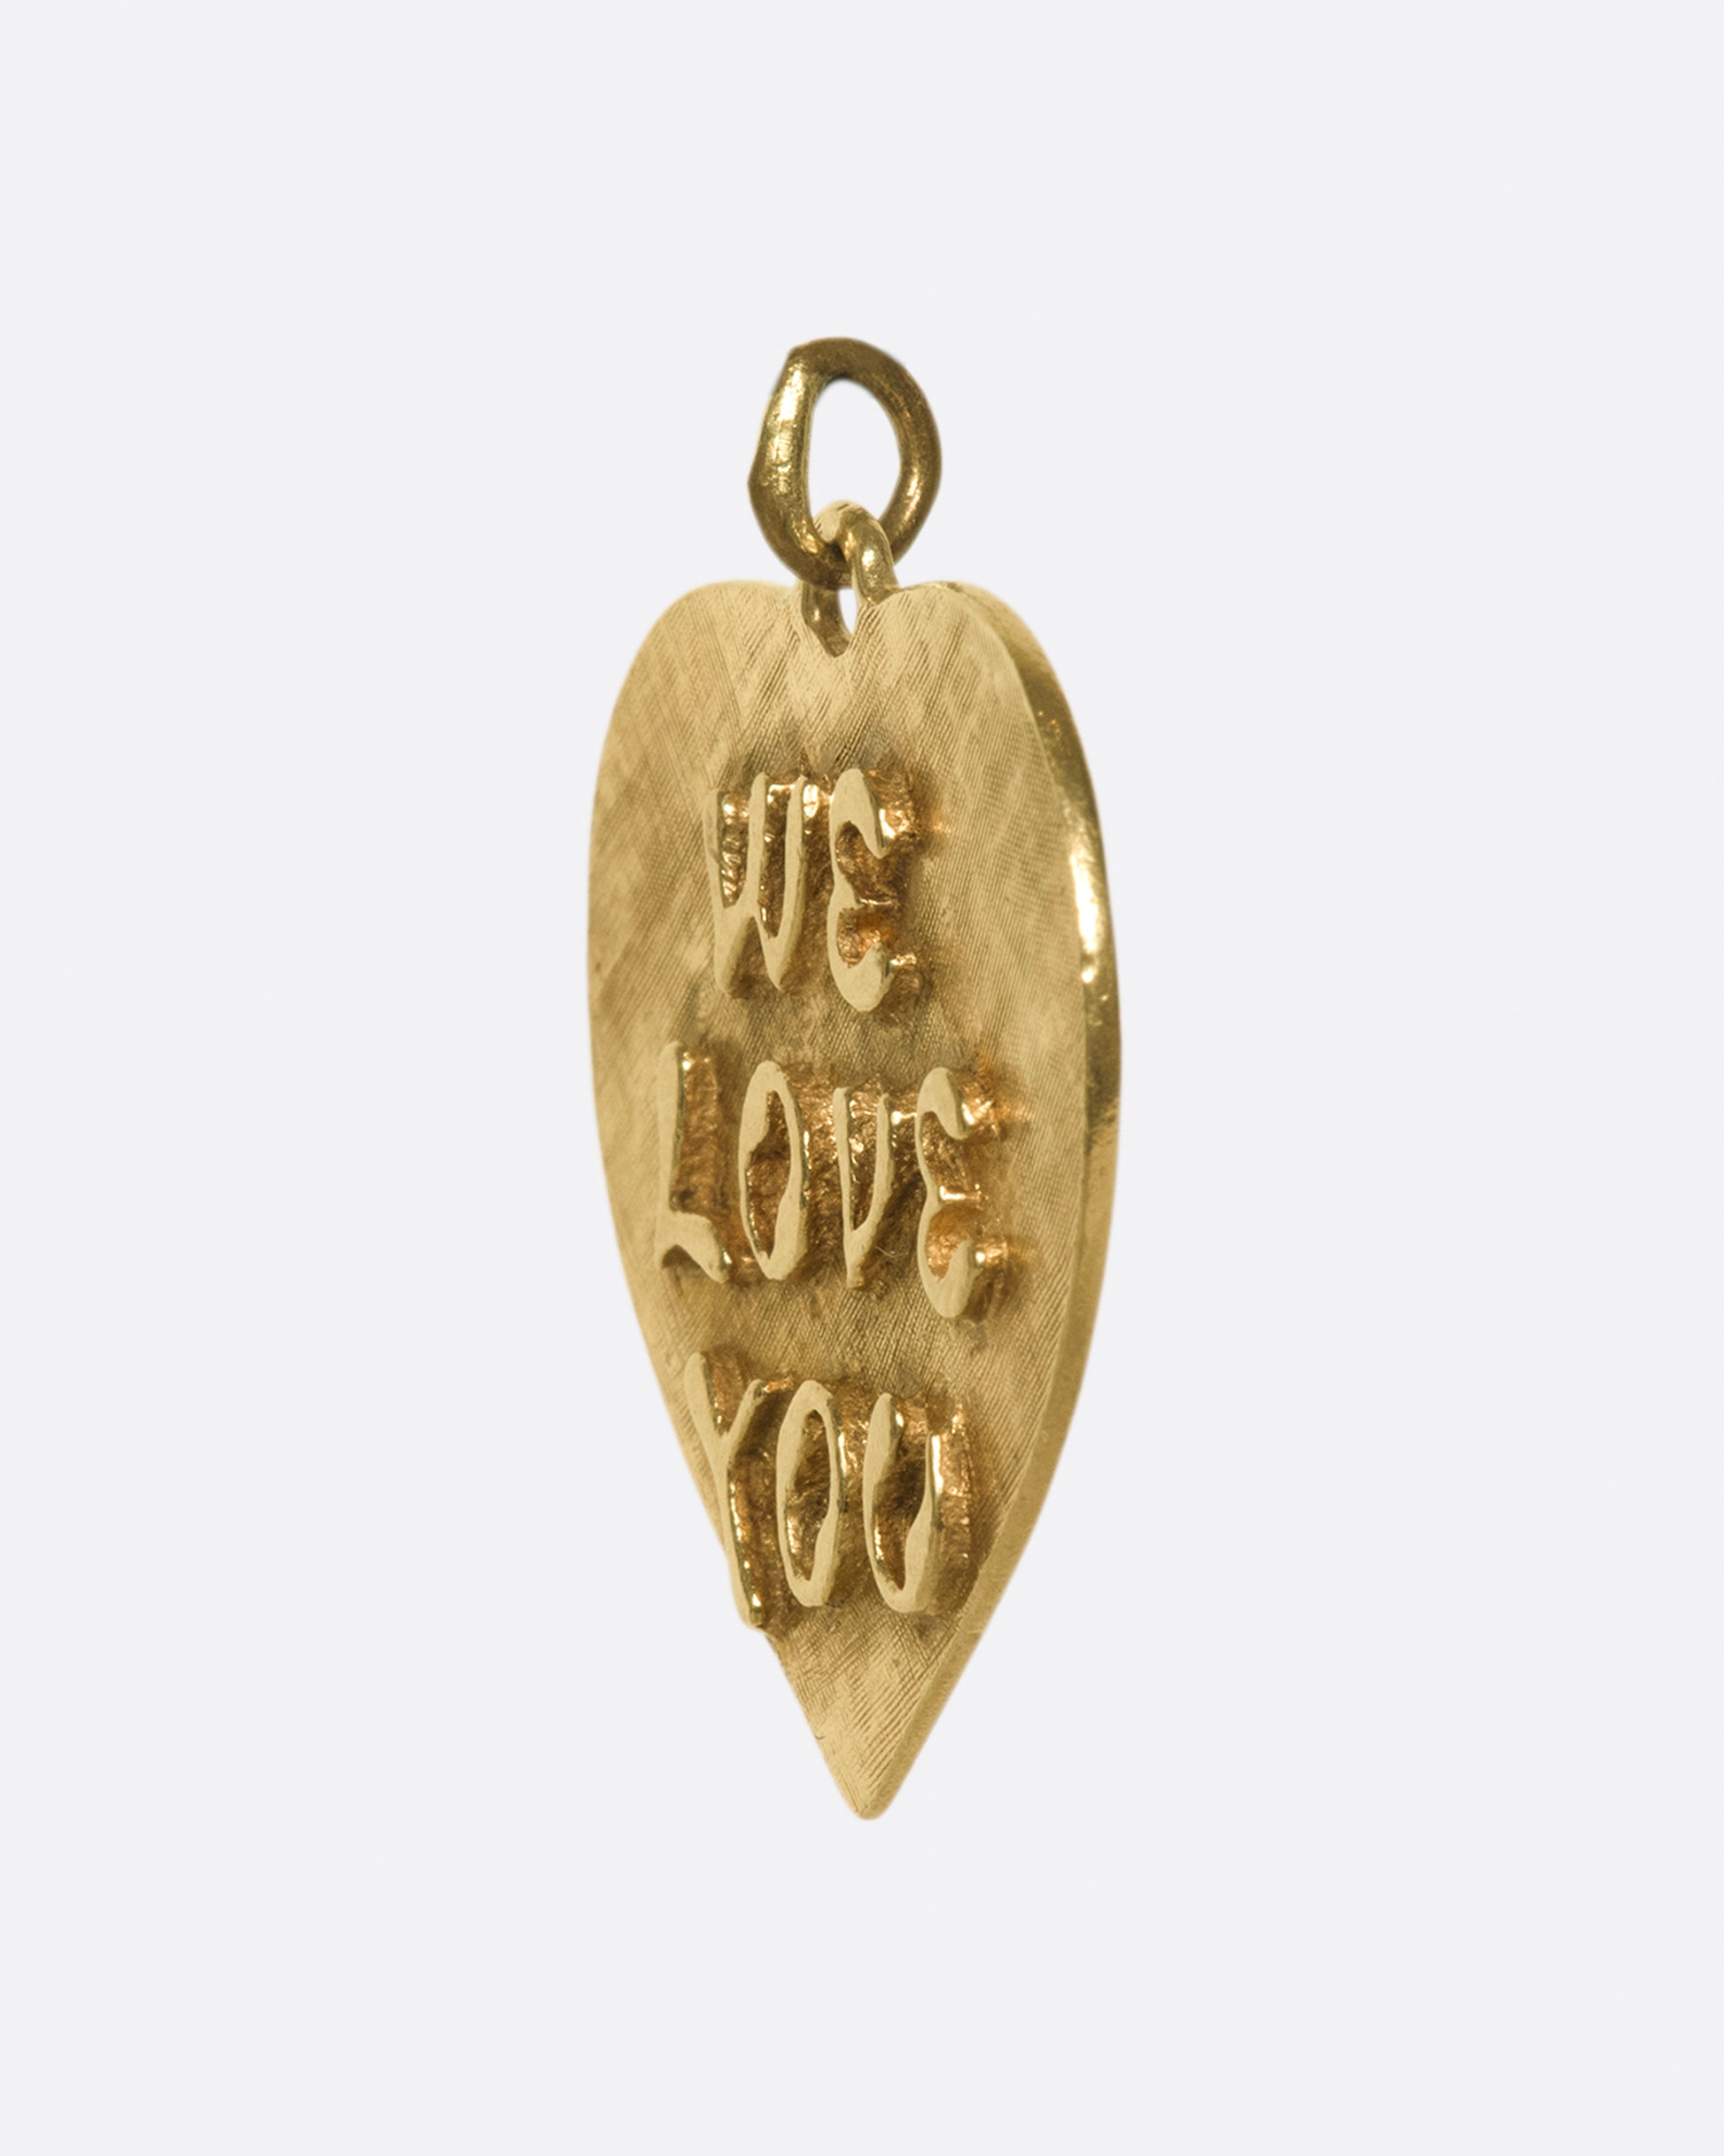 A large, textured heart tag with sweet sentiments on either side.